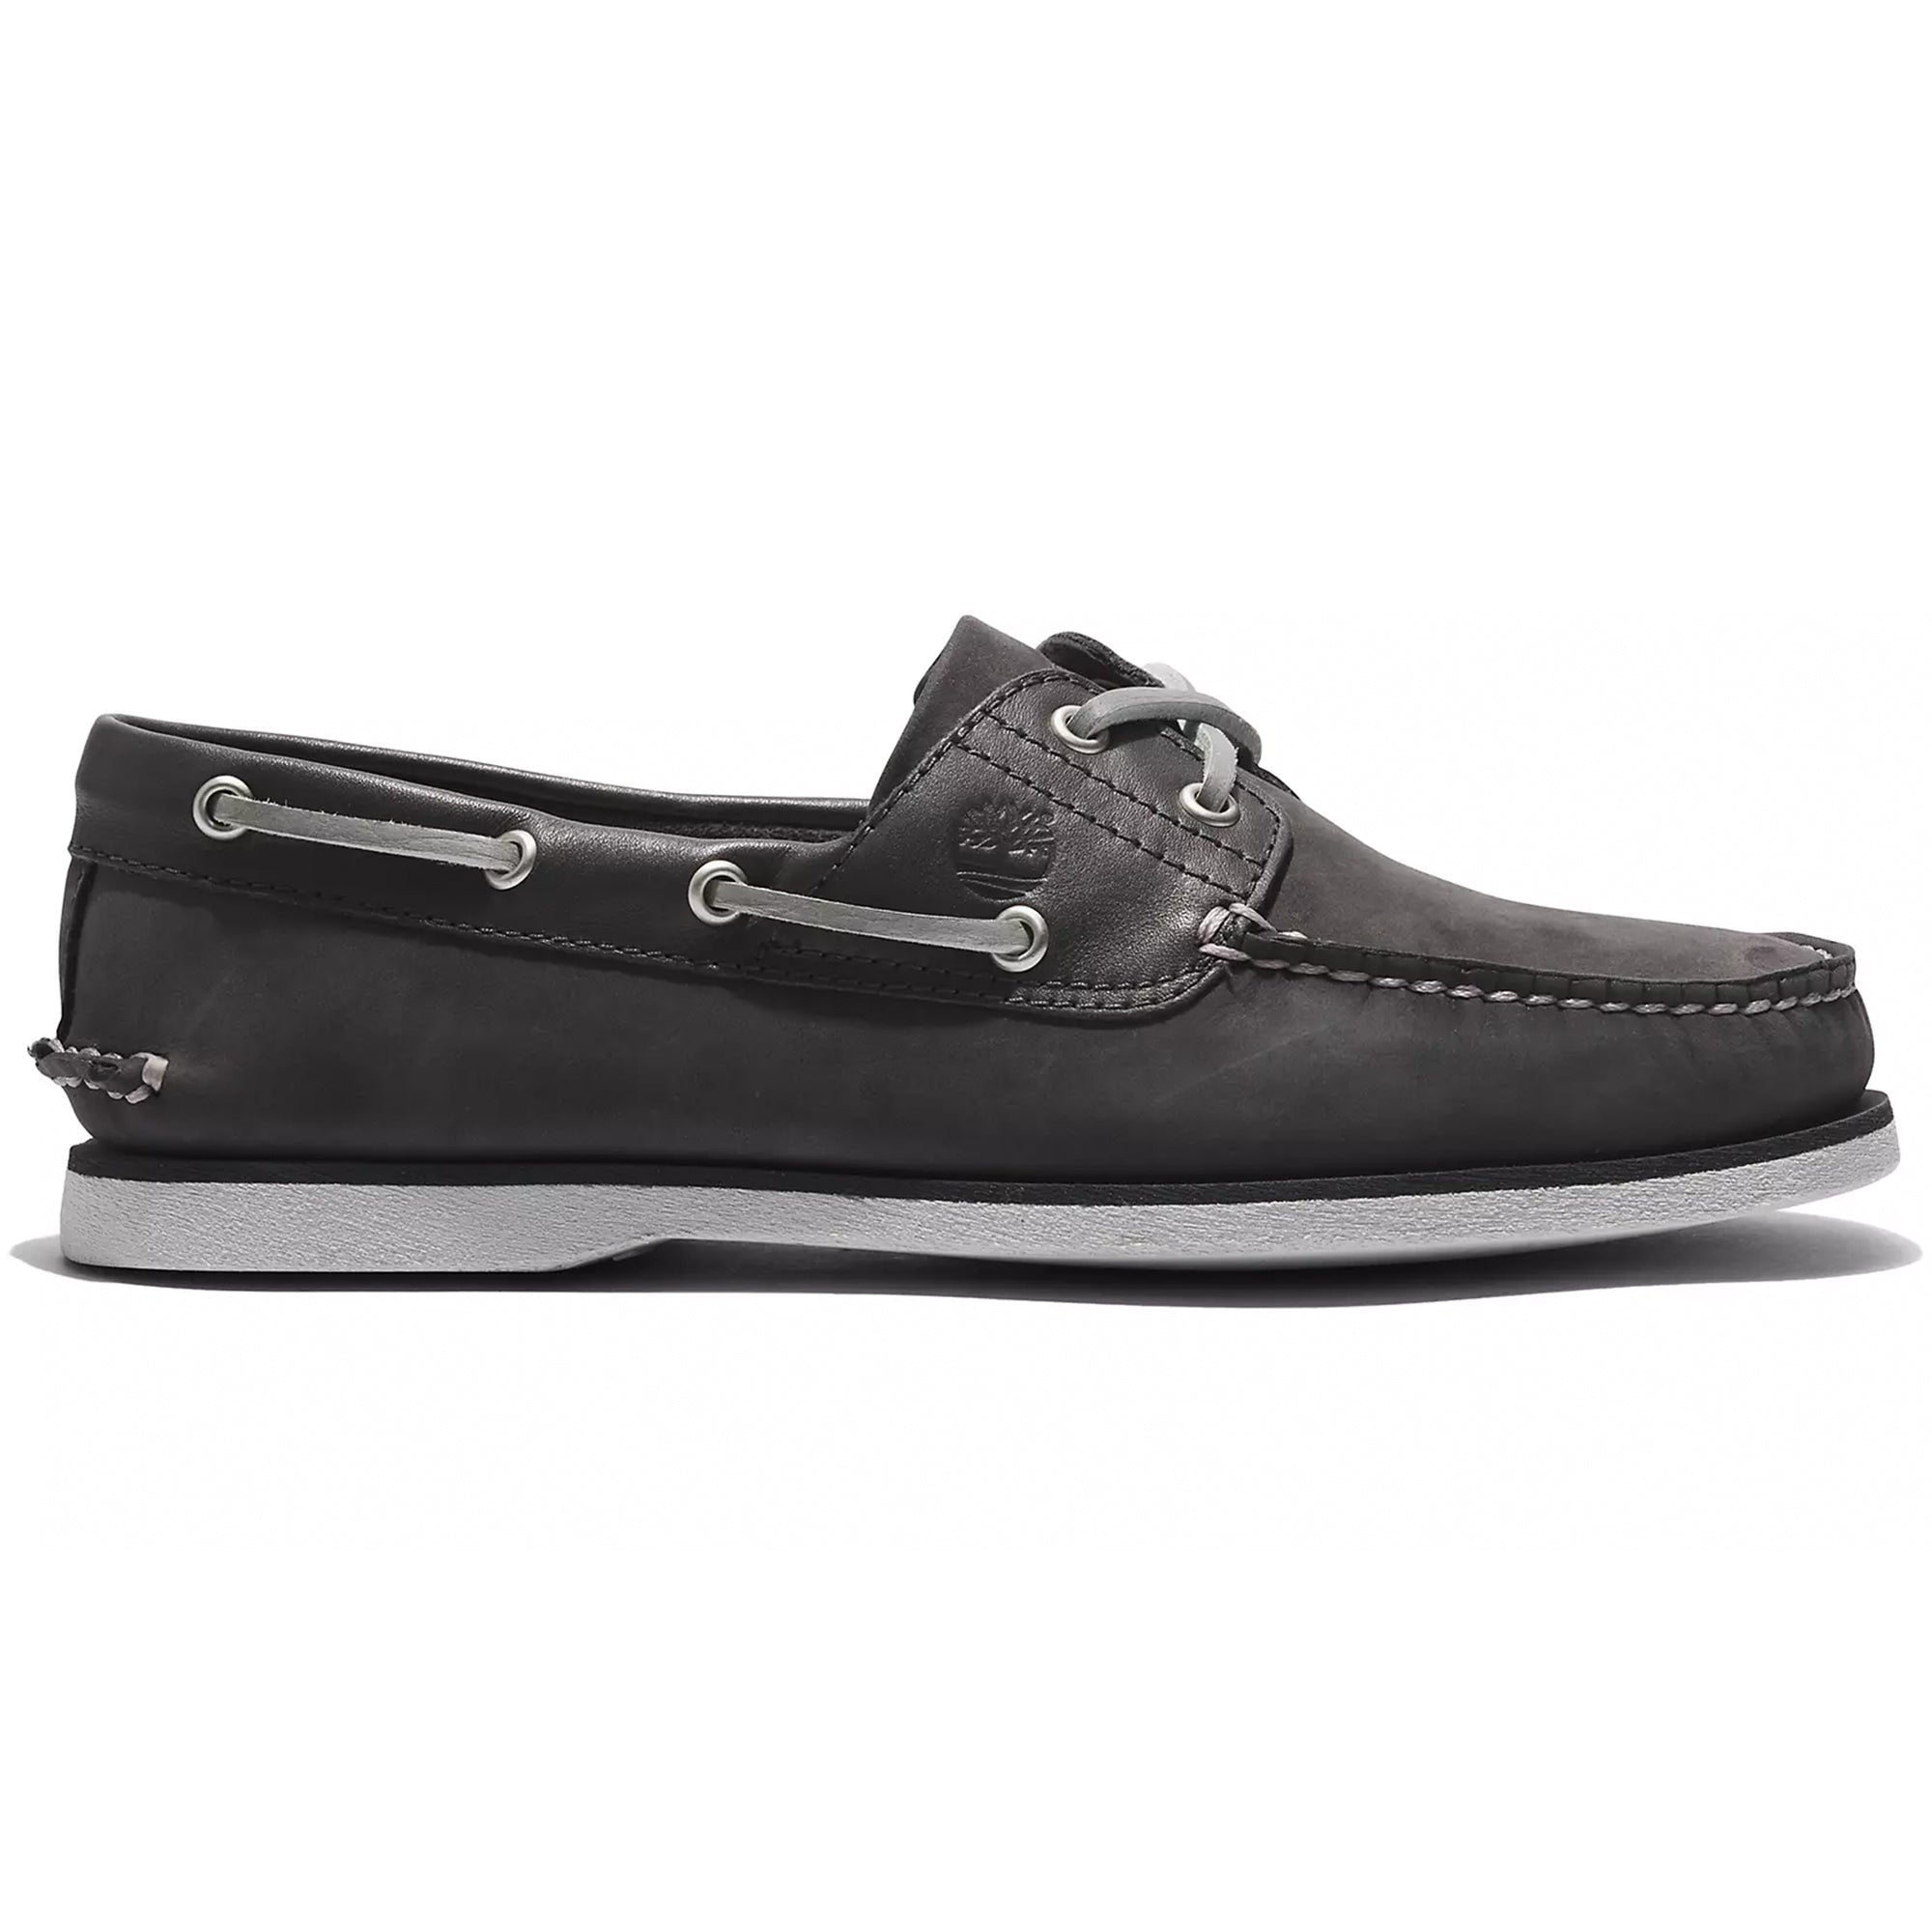 Timberland Classic Boat Shoe - A5QWR Blackened Pearl